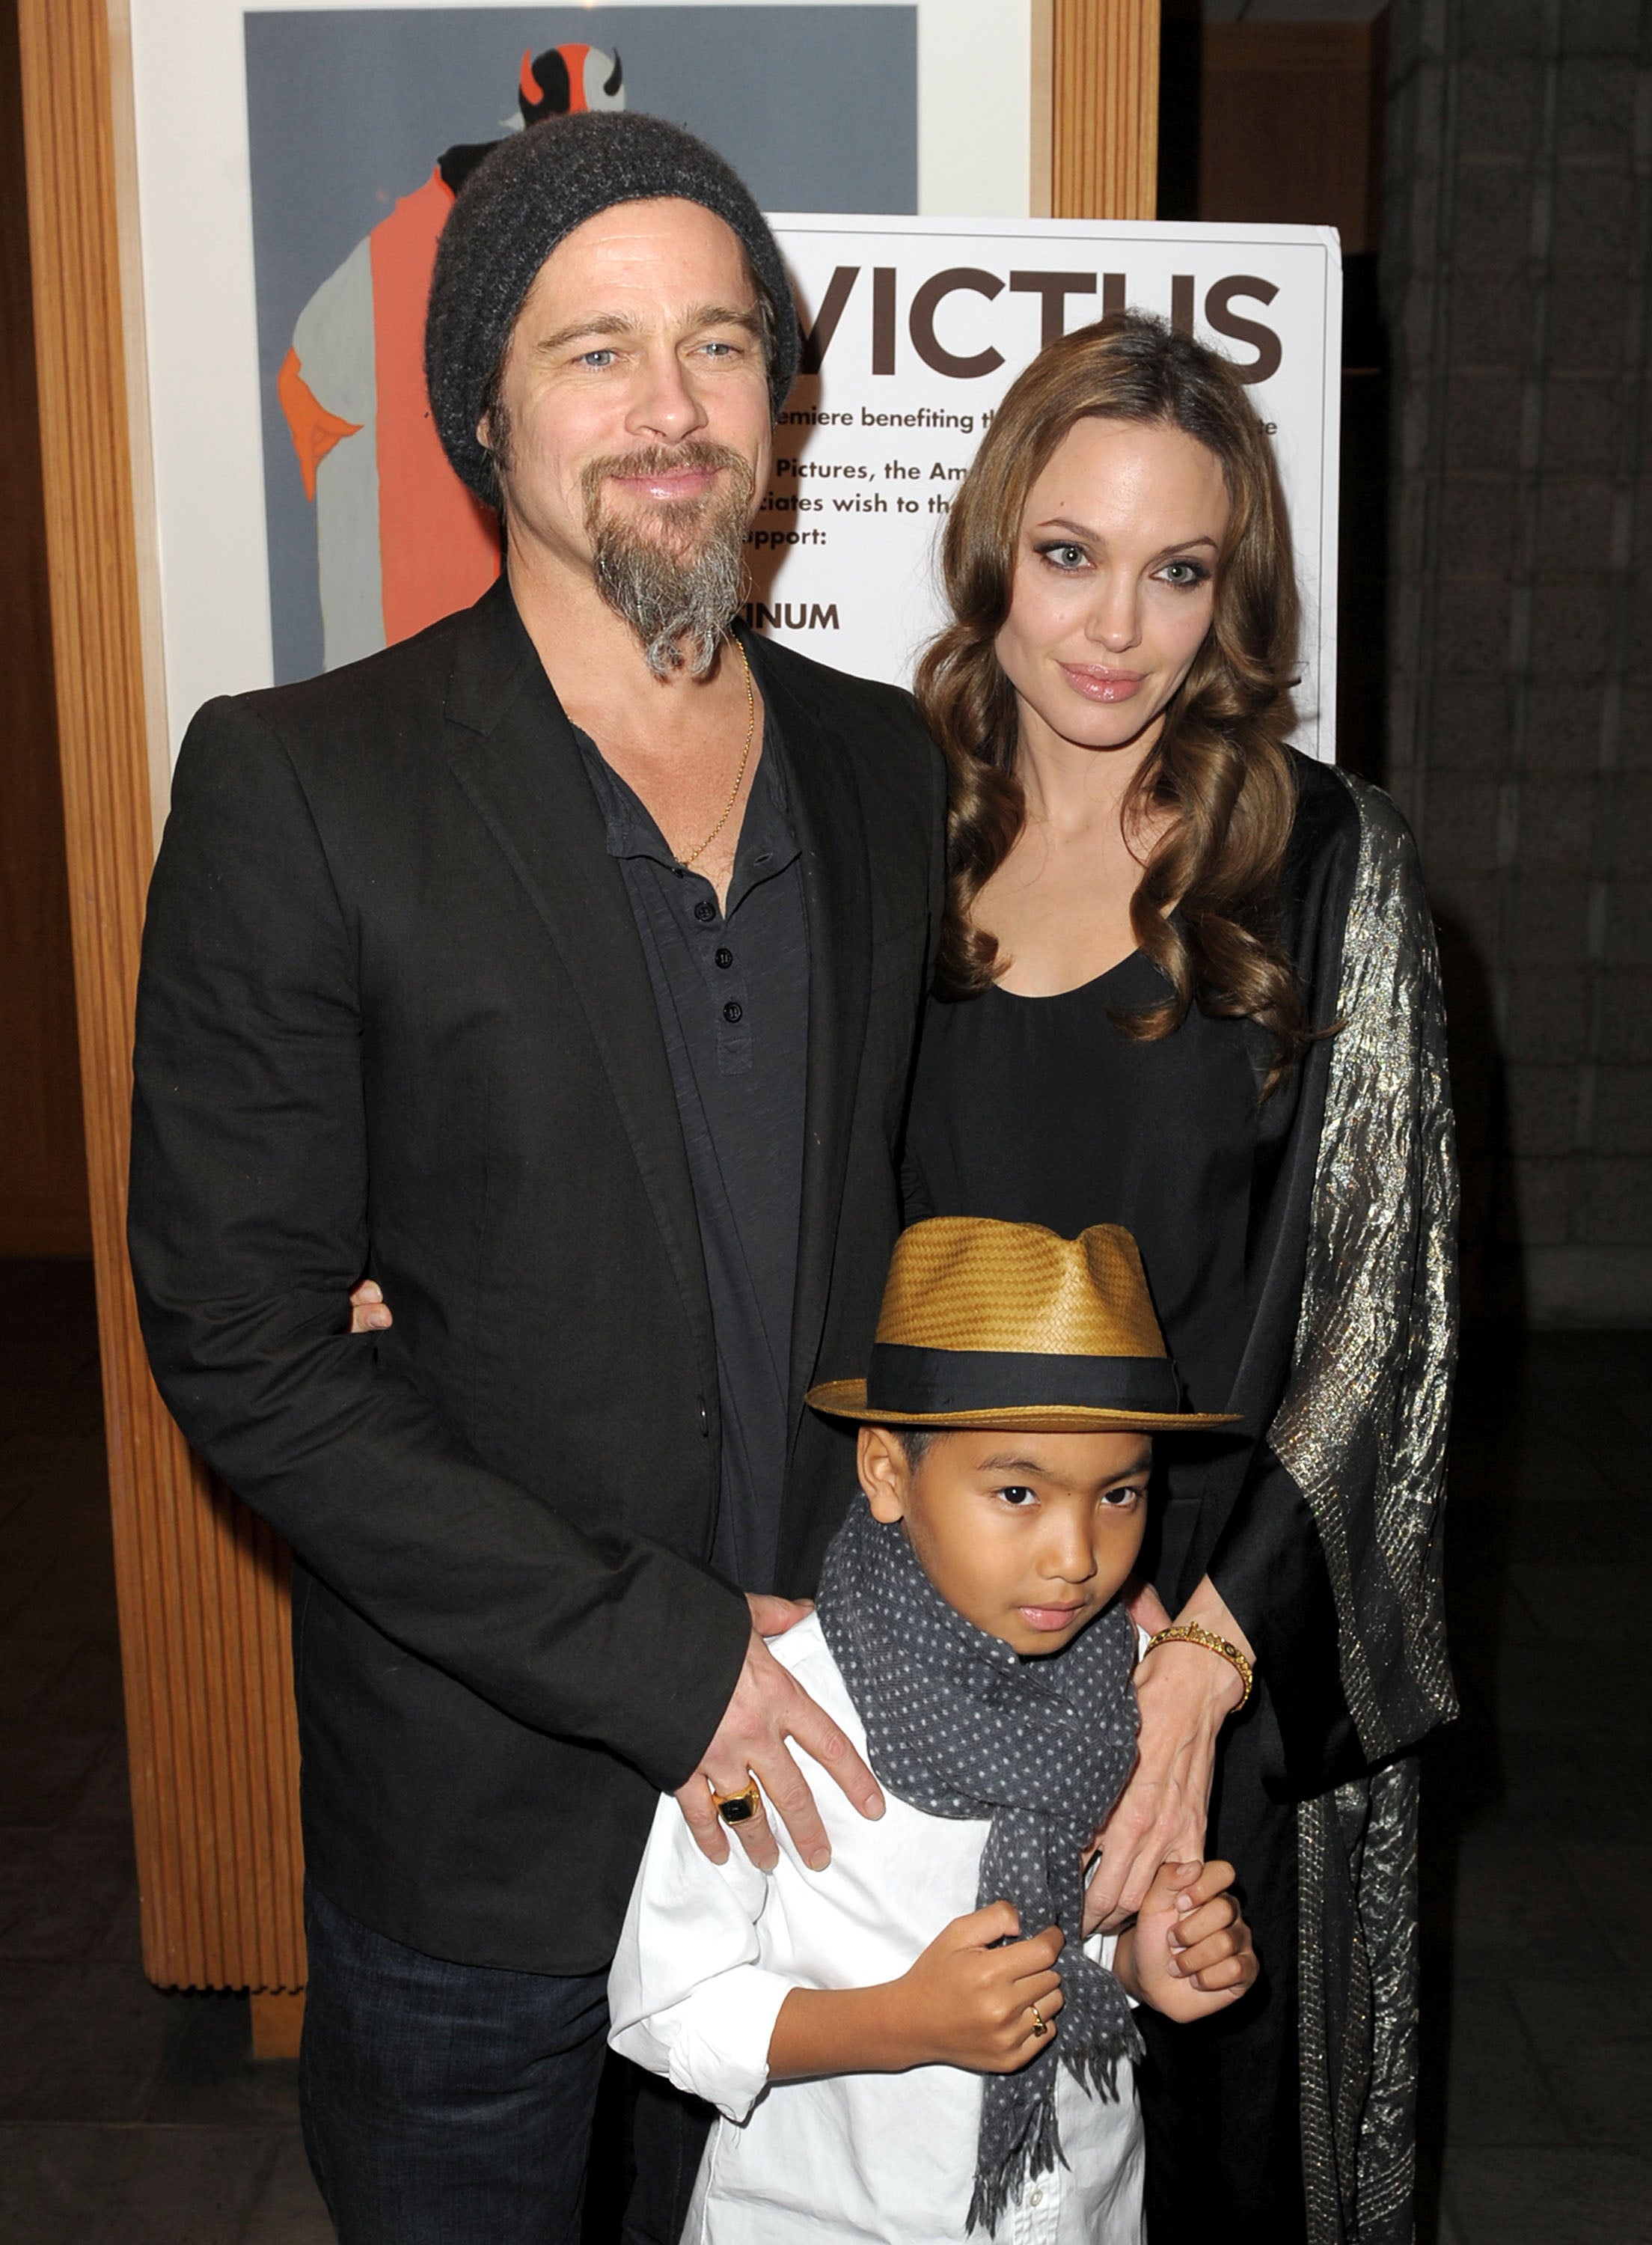 What has Maddox Jolie-Pitt been up to in 2023, at age 21? From his